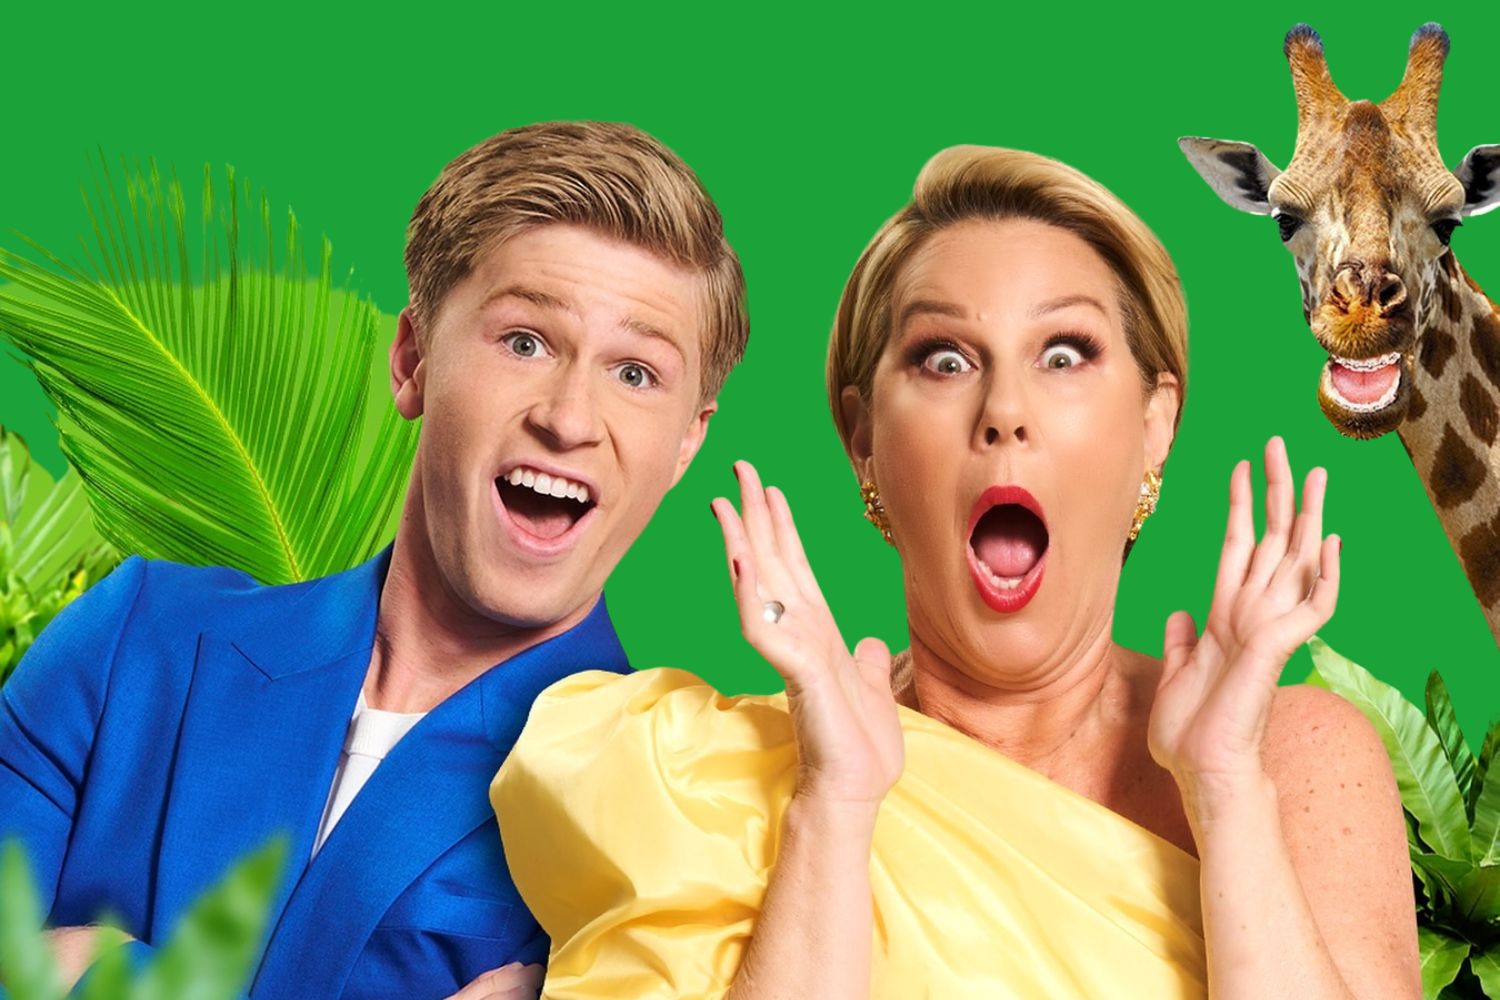 im-a-celebrity-get-me-out-of-here-julia-morris-robert-irwin